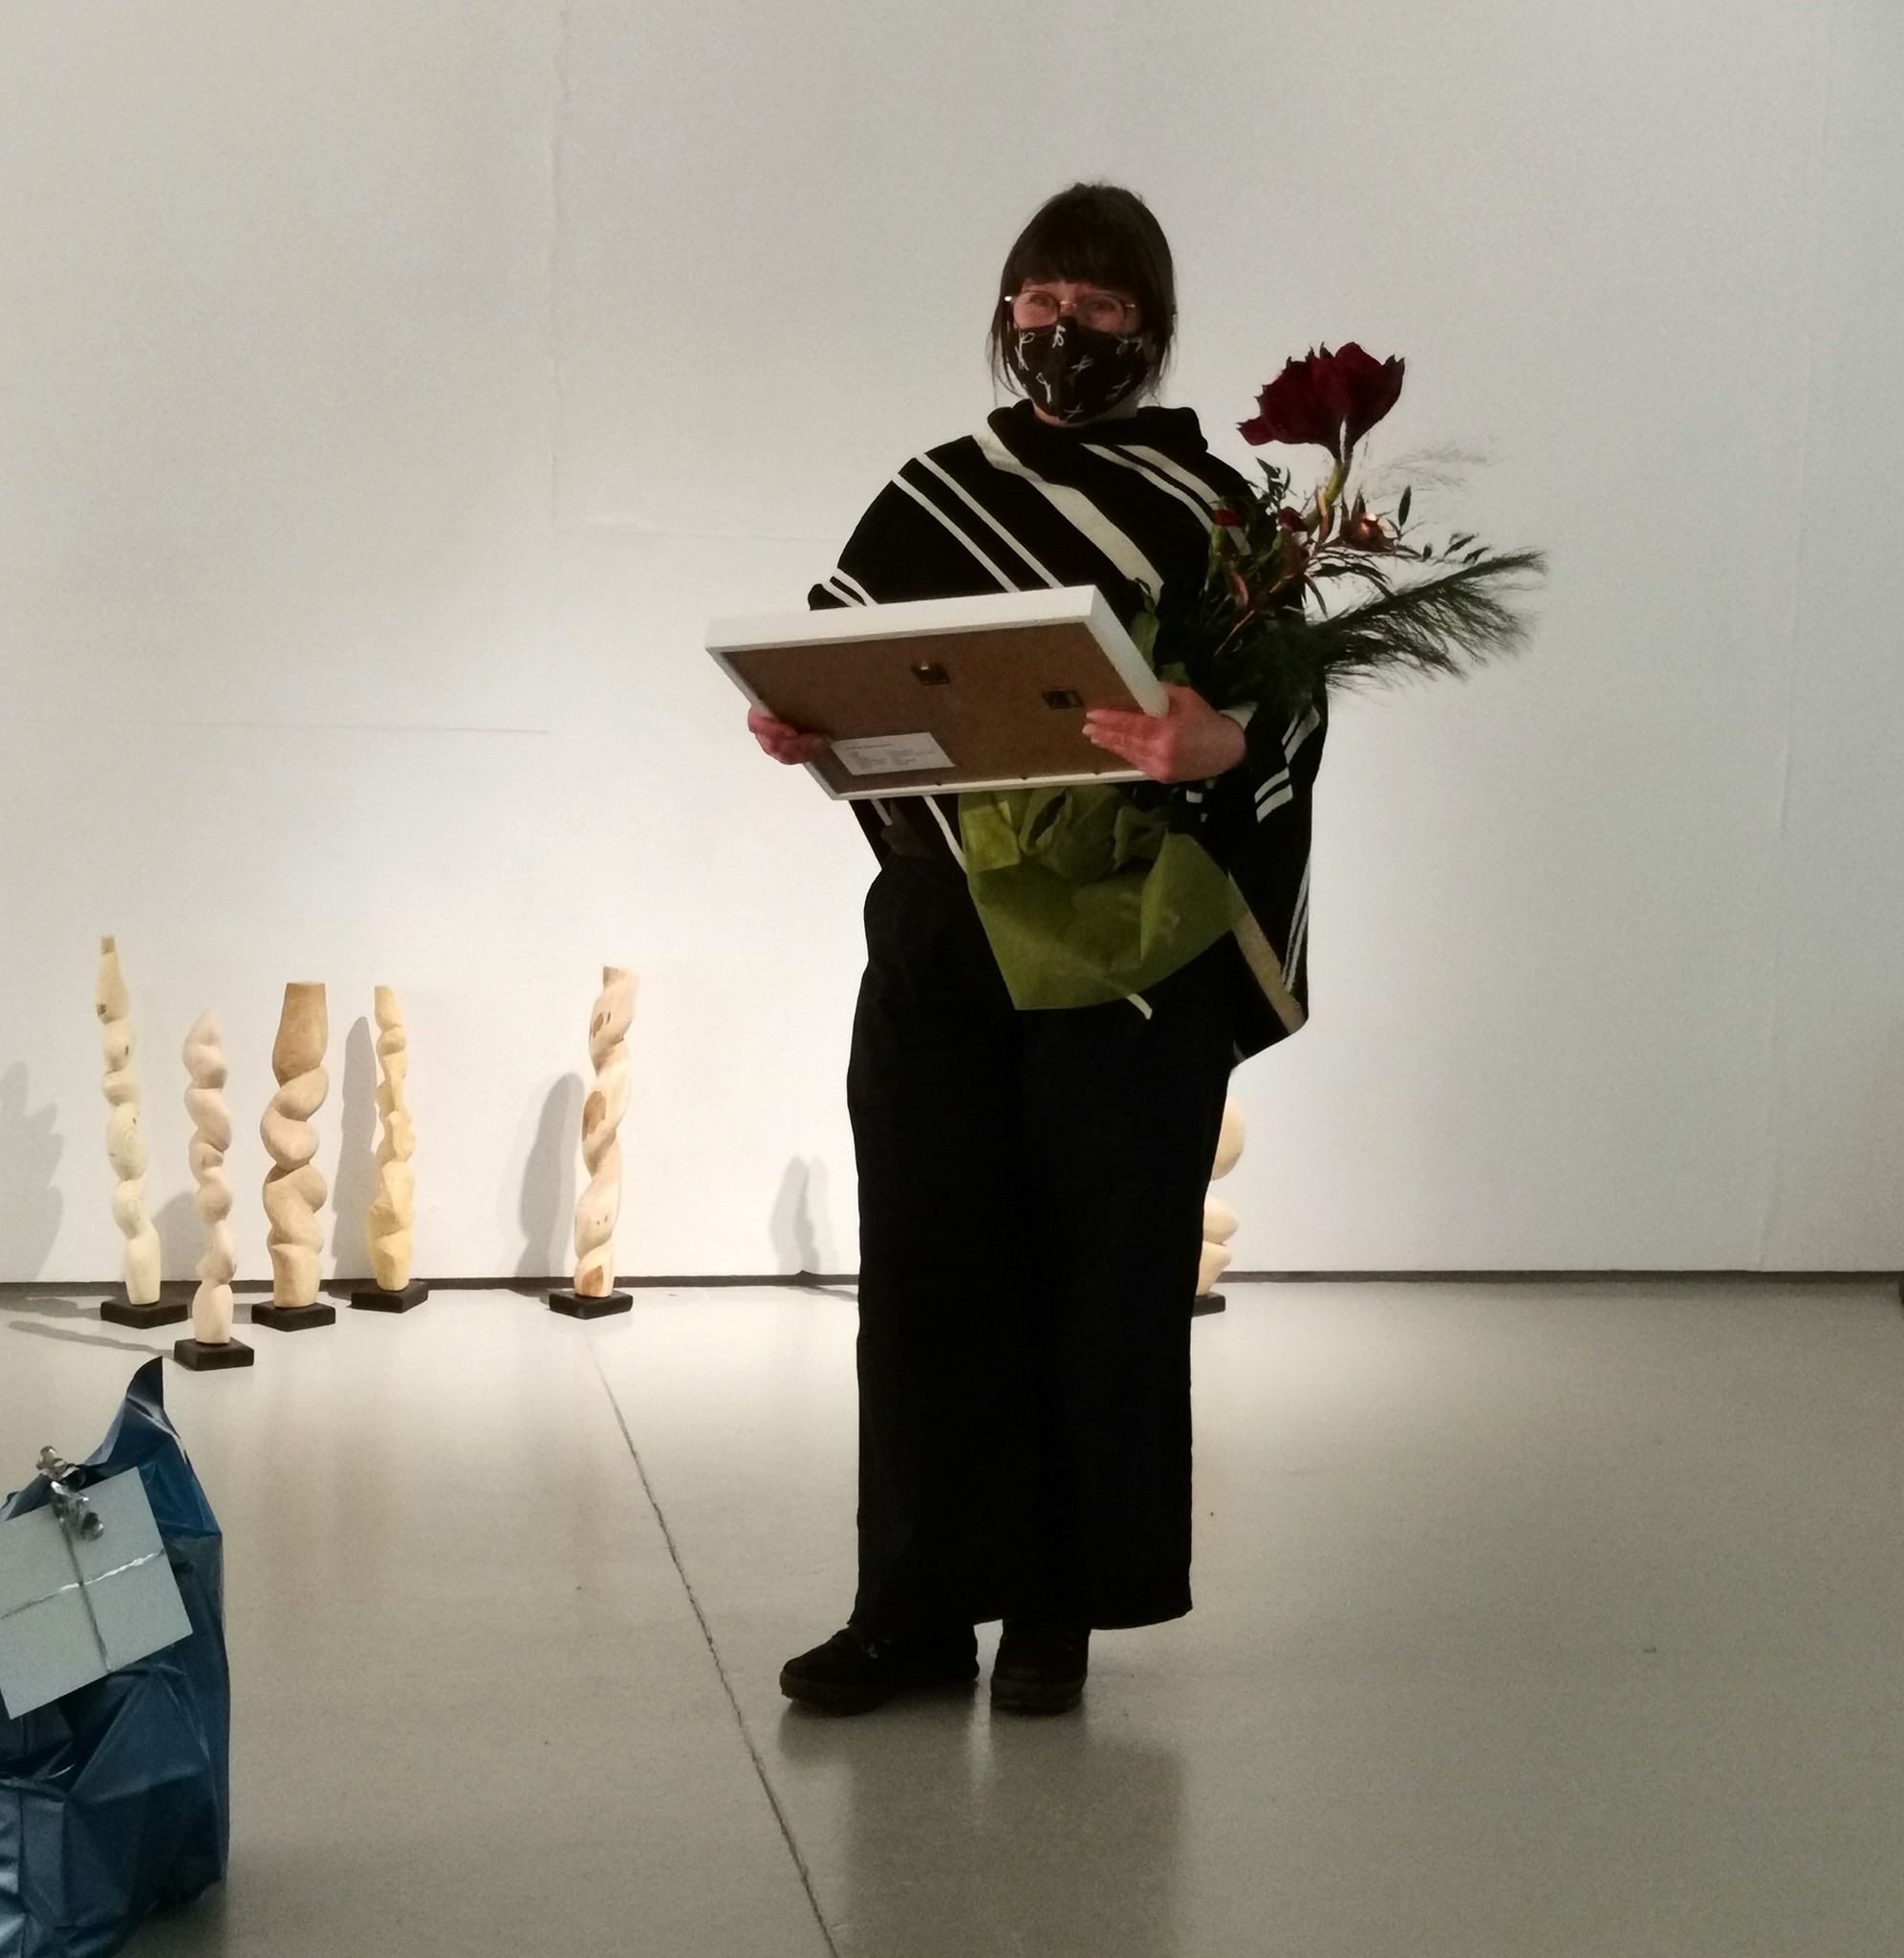 You are currently viewing Sirpa Taulu, an Executive Director of Ars-Häme ry, received the Ars-Häme ry’s 2020 recognition award for her praiseworthy work to promote Häme fine arts. It was the artwork Vahdinvaihtoa by the artist Edwina Goldstone.